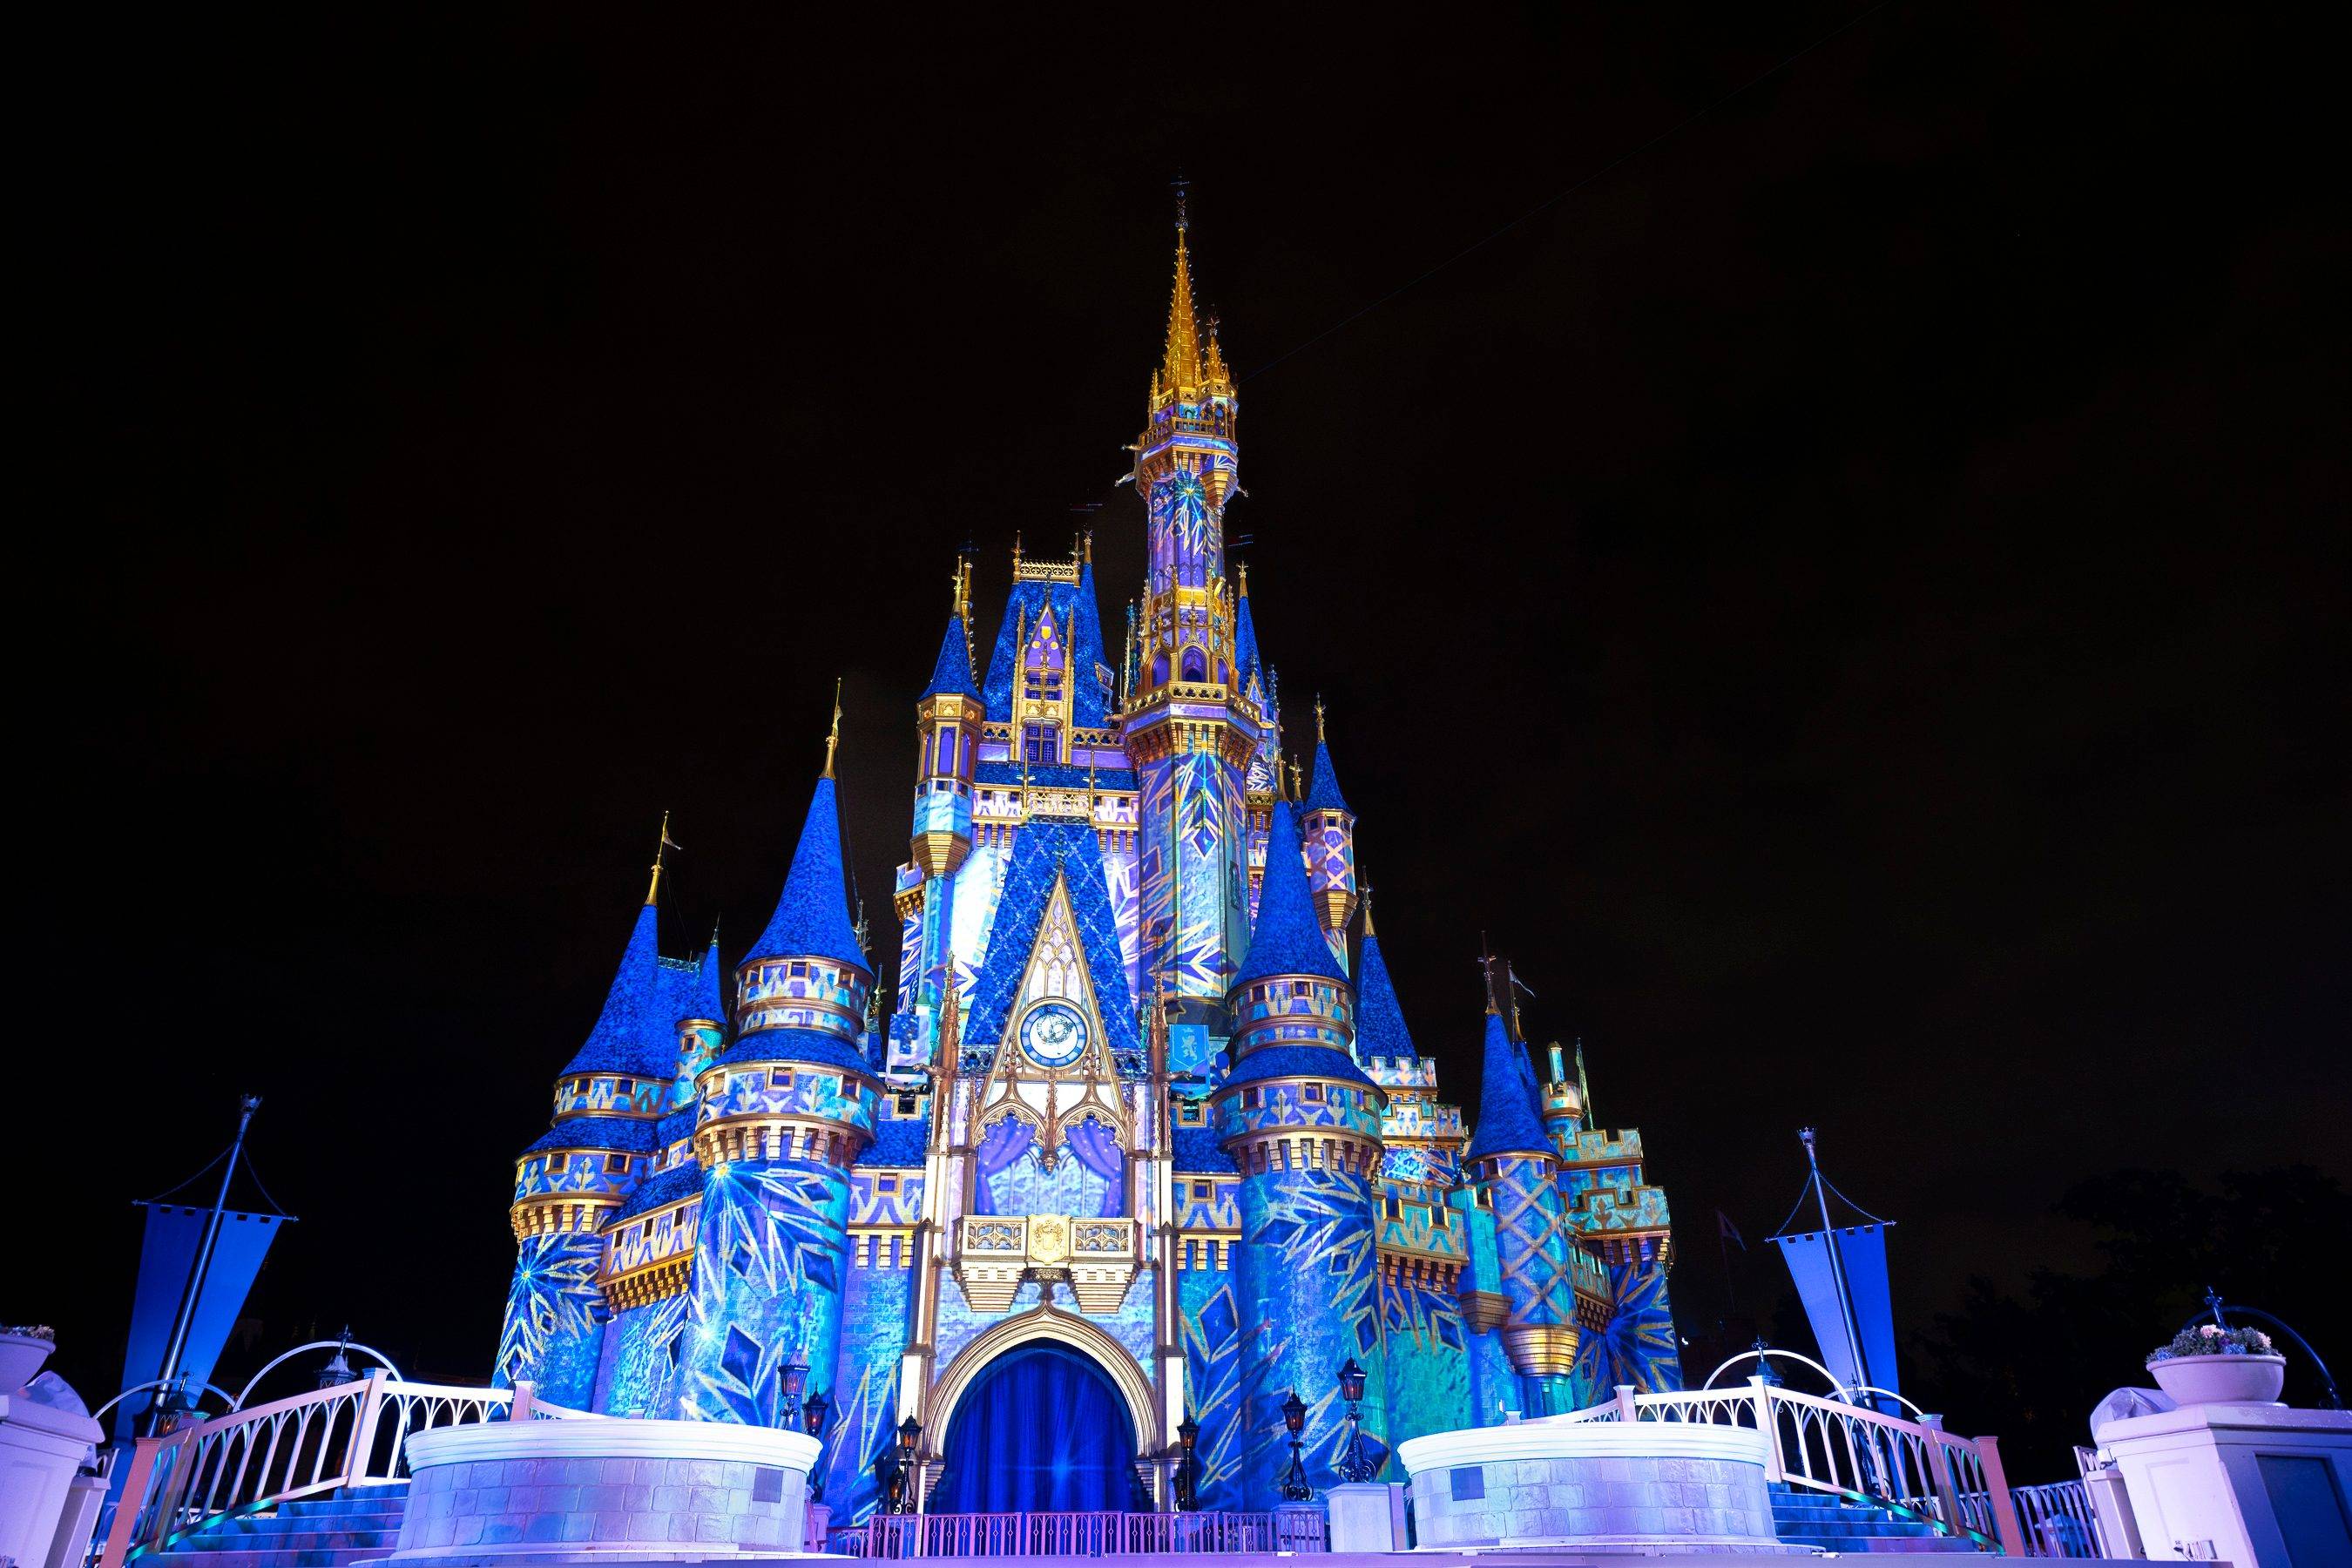 'A Frozen Holiday Wish' returns to the Magic Kingdom for a limited extended run